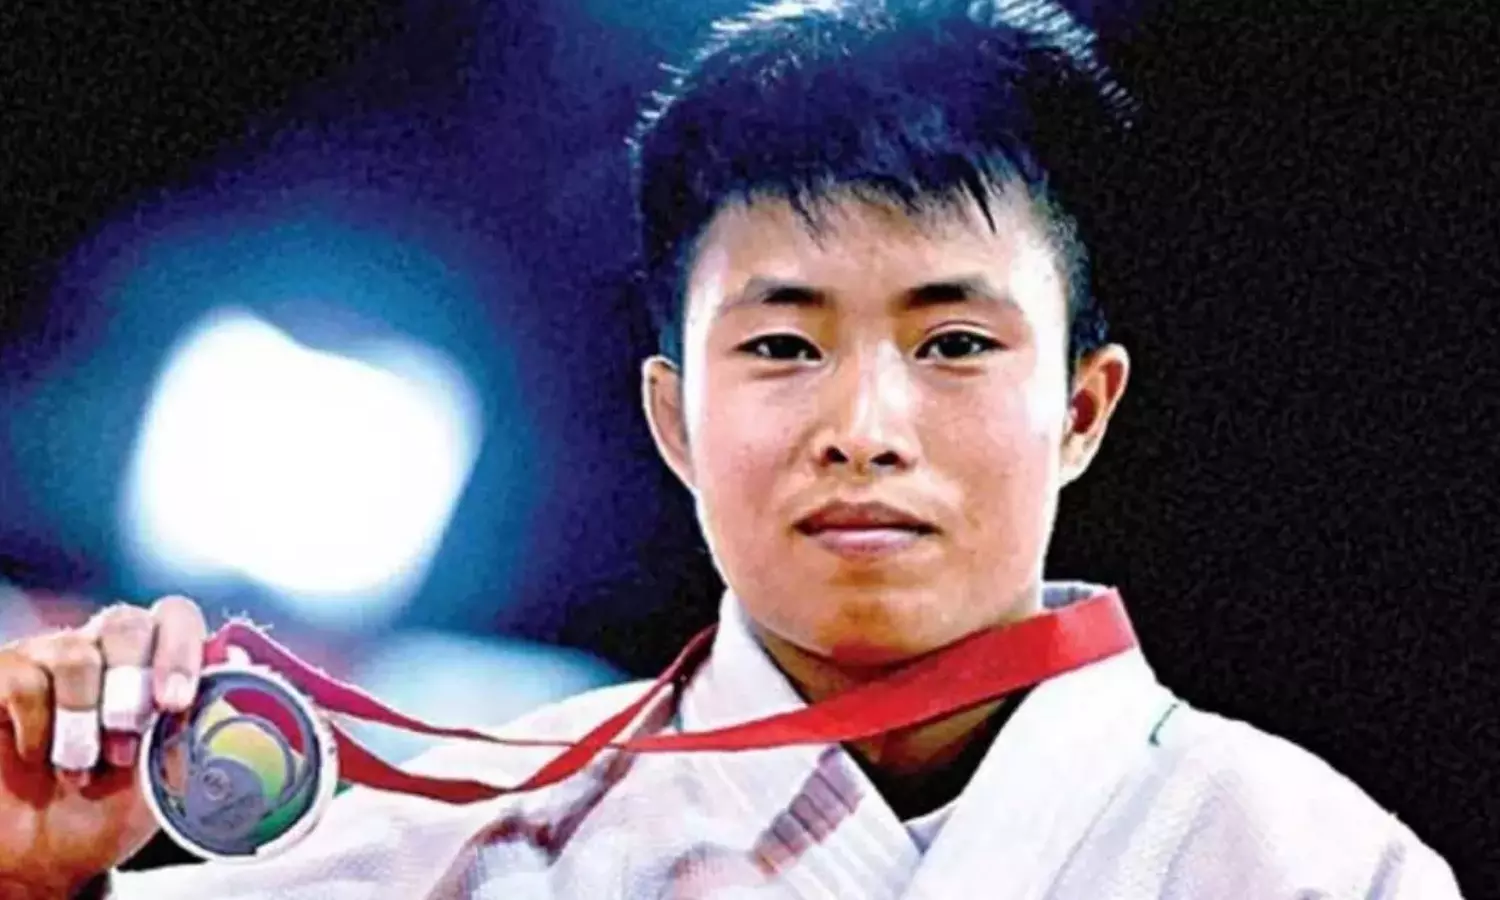 Tokyo Olympics Judo LIVE, July 24, Day 1 — Sushila Devi exits the competition in the opening round — Updates, Scores, Results, Blog